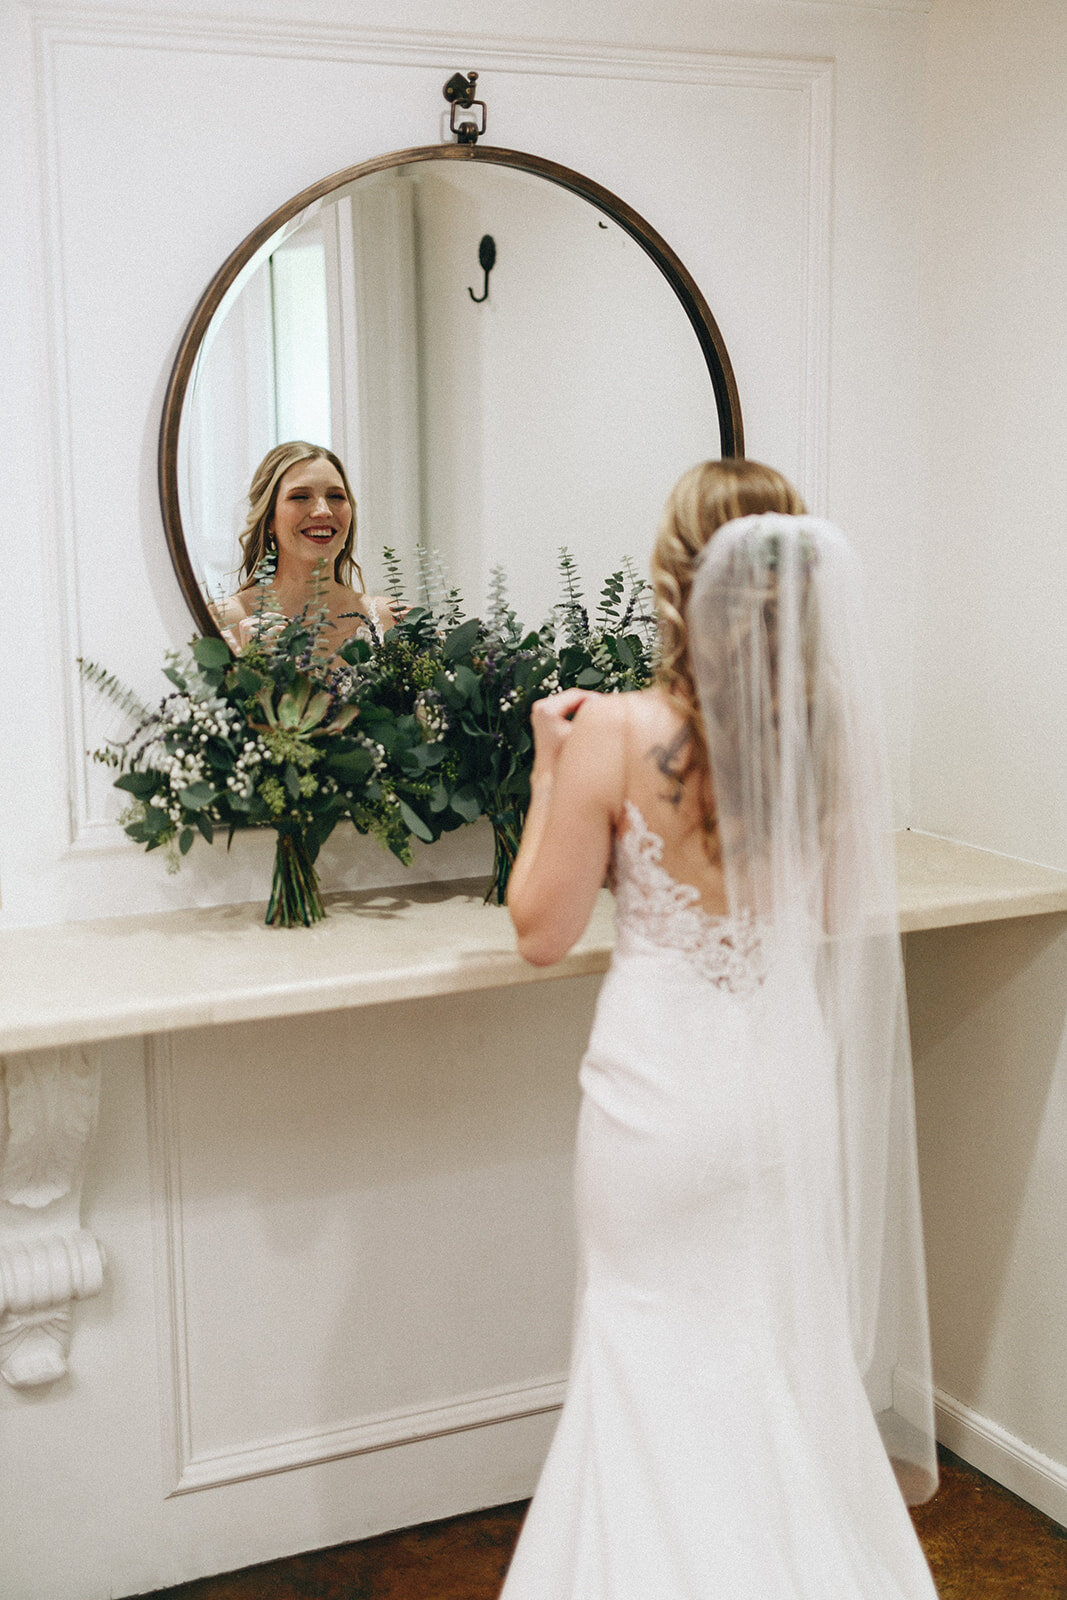  bride getting ready for her wedding  